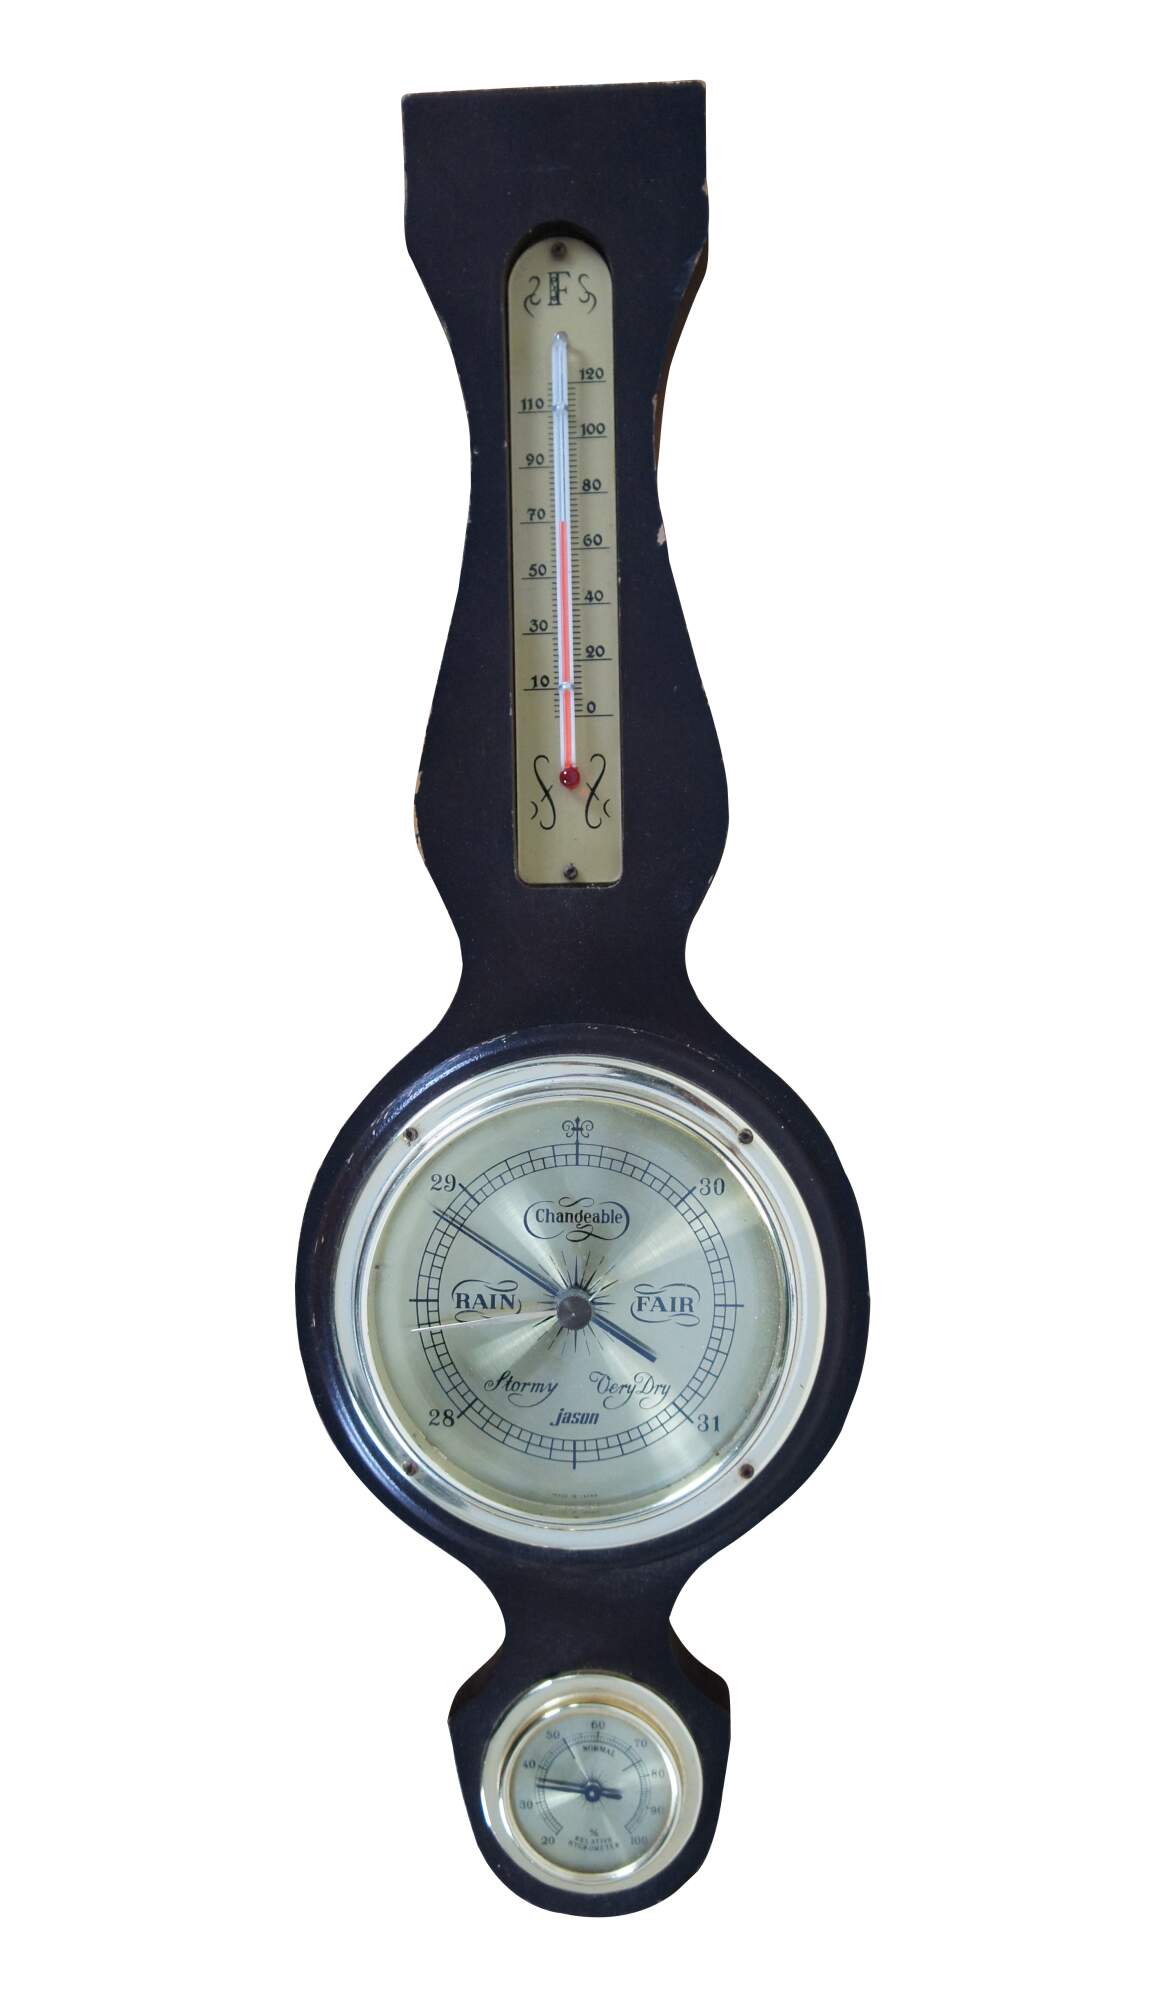 Wall thermometer, hygrometer and barometer